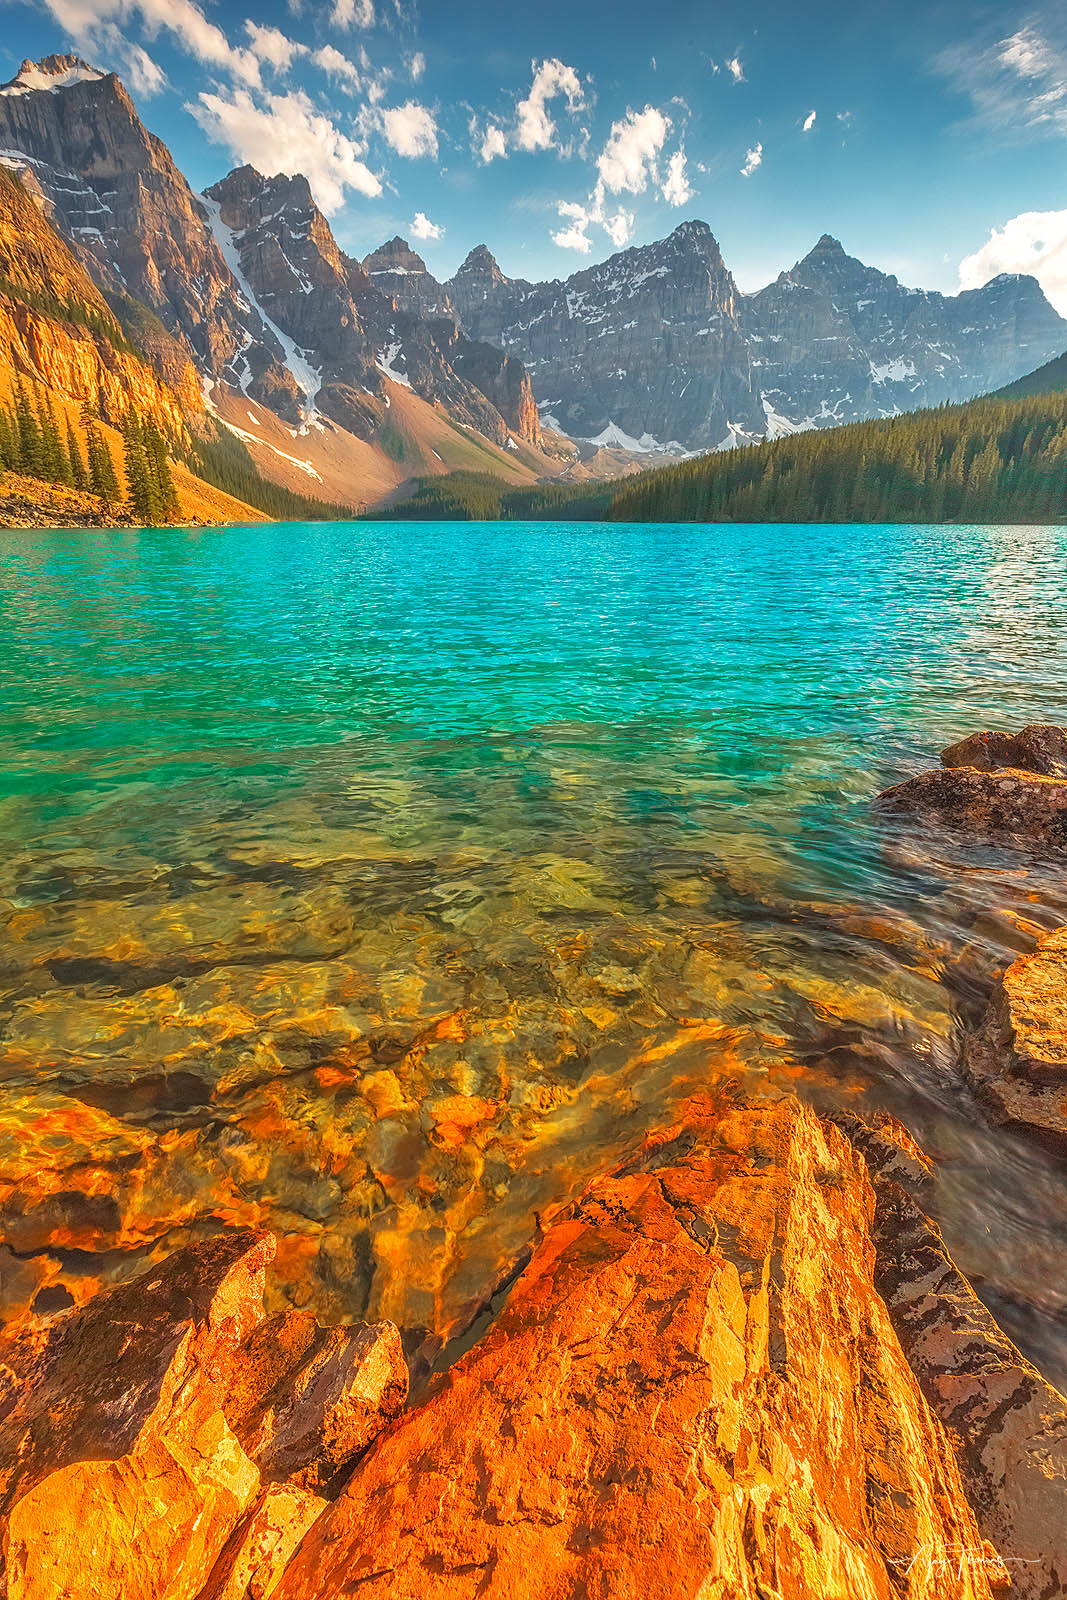 Aqua blue waters of  glacially-fed Moraine Lake is a feast to eyes  any time of the day . This image was taken during a Mid day...